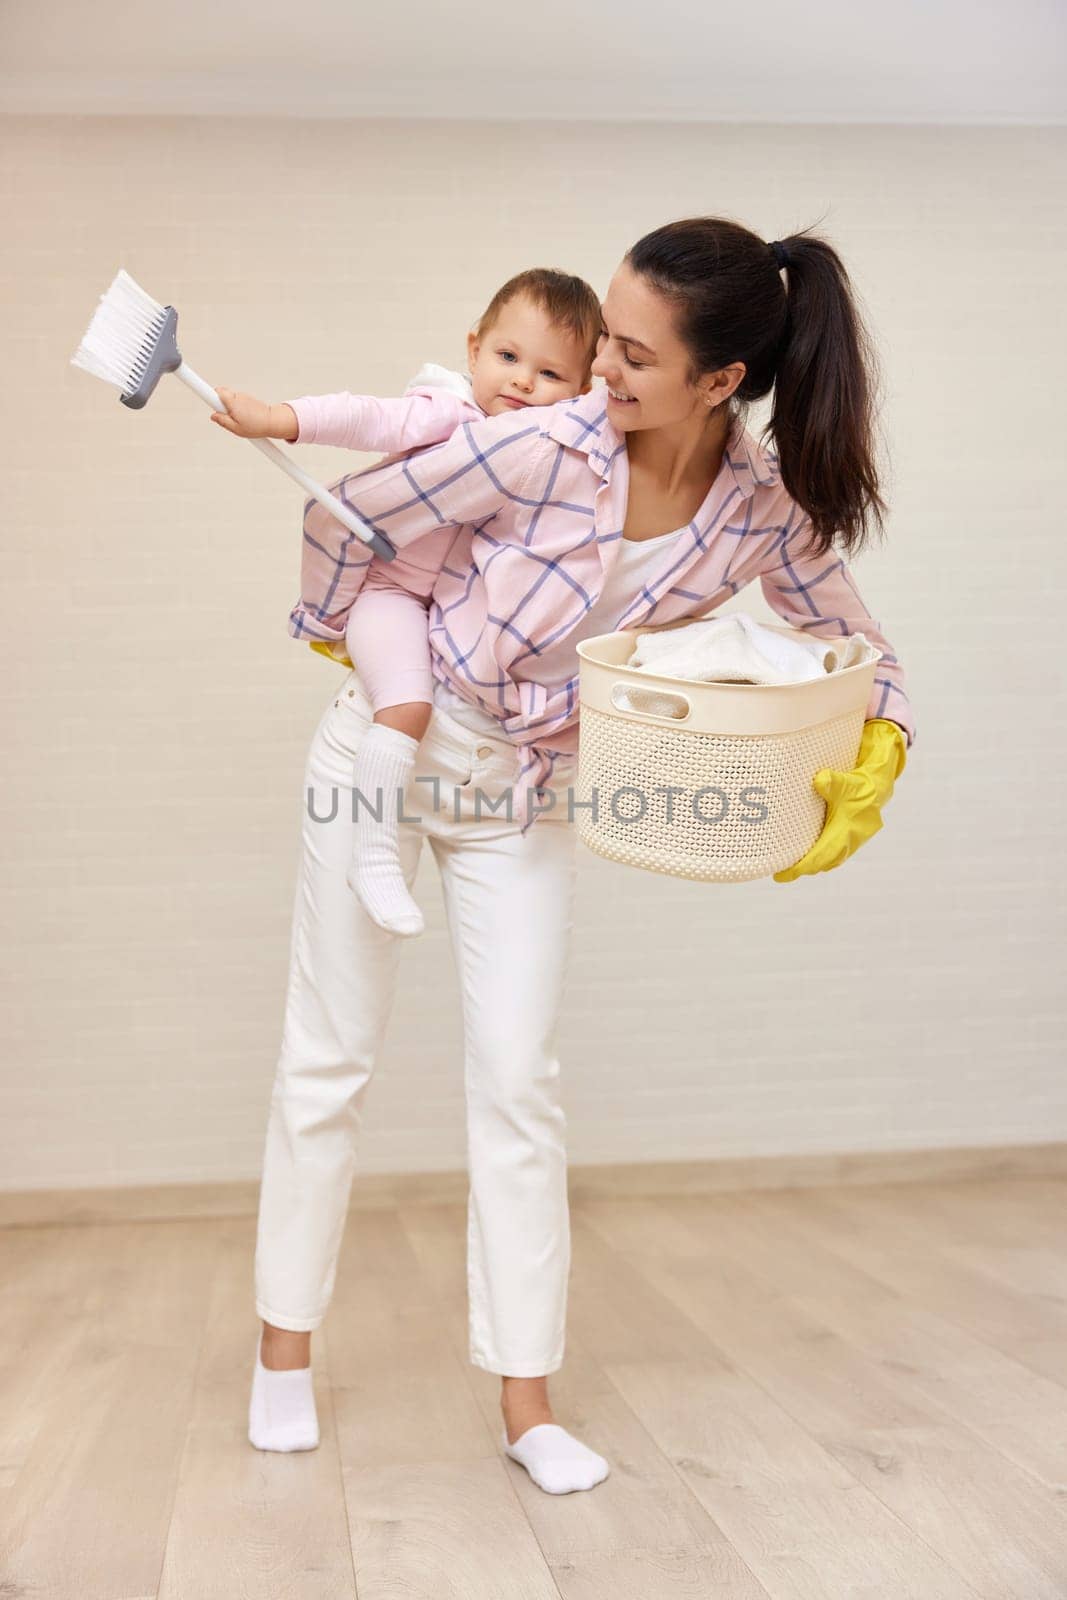 happy mother housewife is holding cute baby girl and basket with laundry at home, Happy family